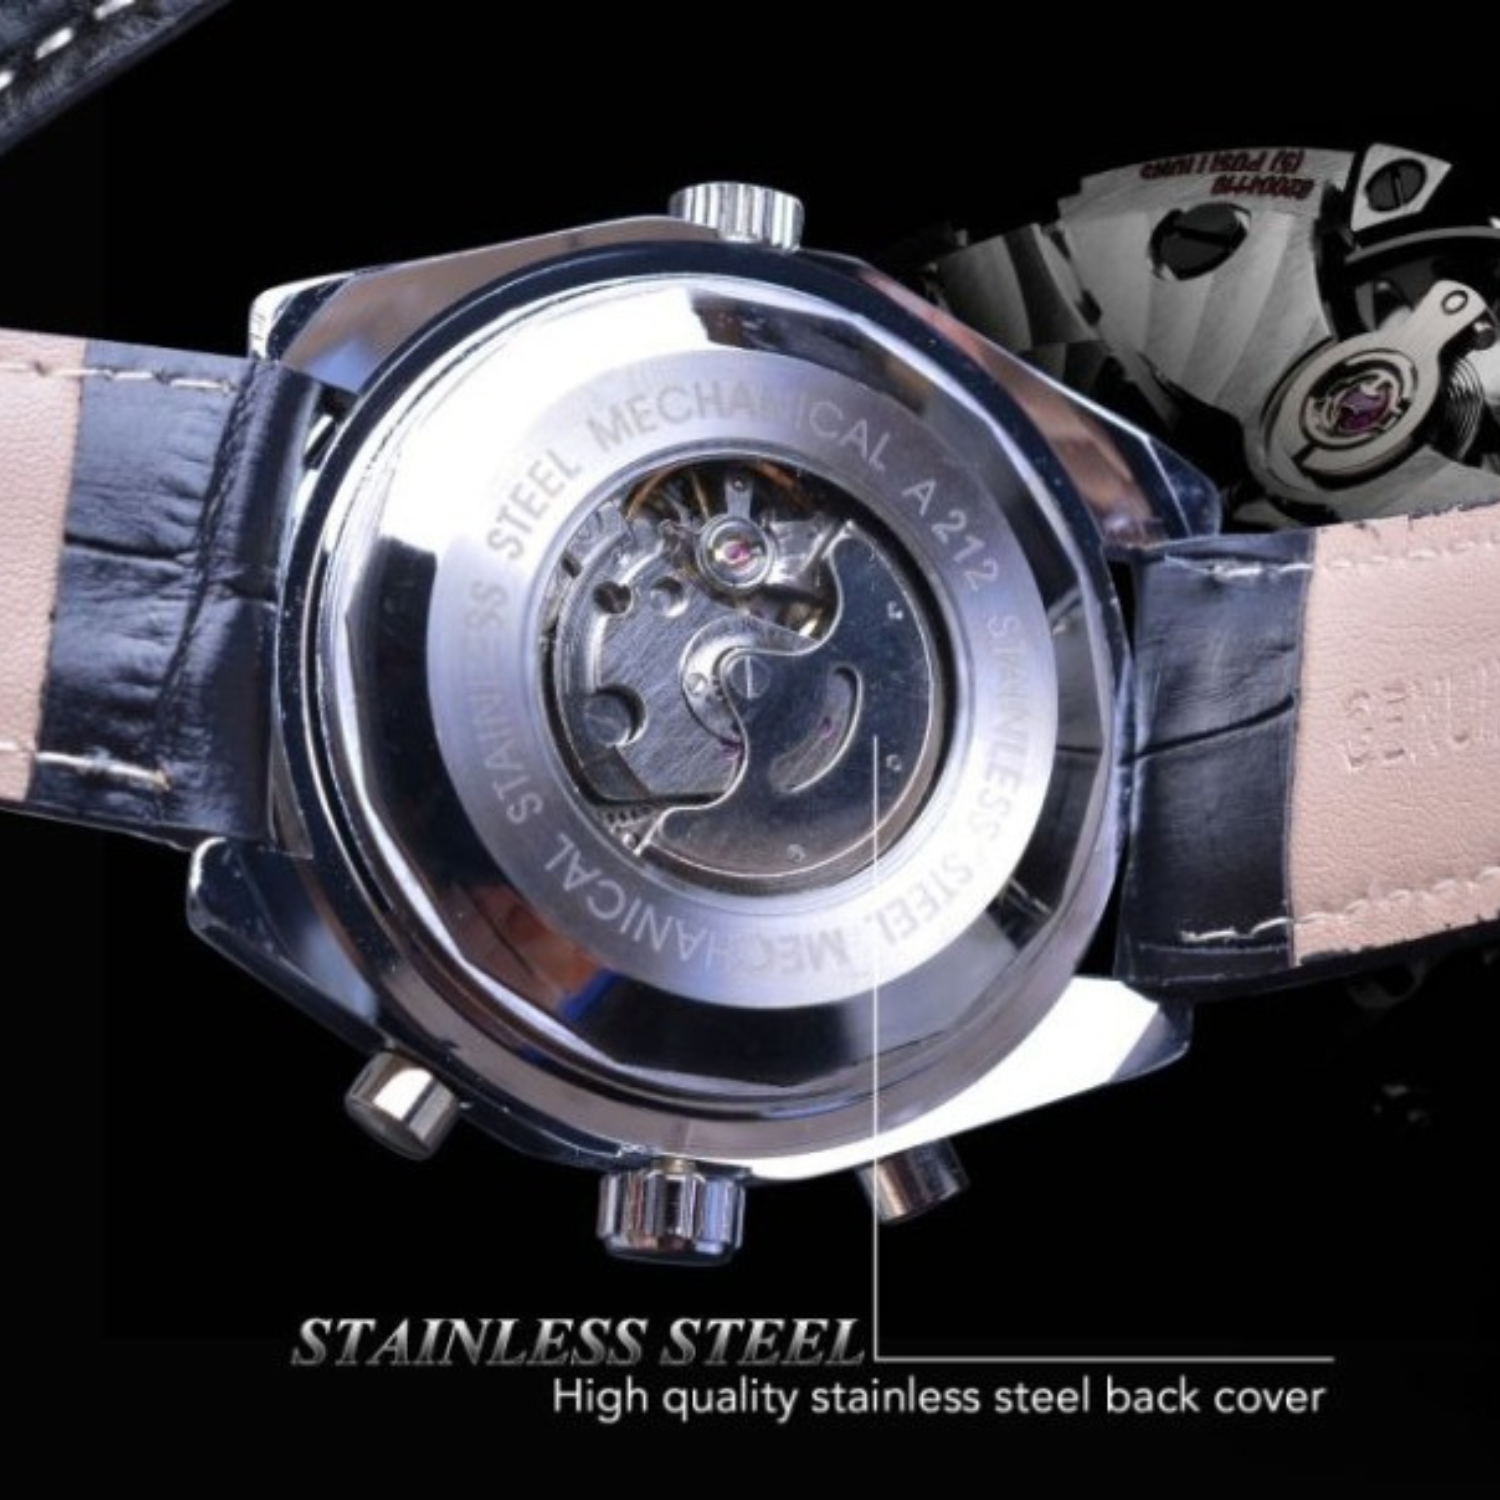 Automatic Mechanical Watch - Mechanical Watches for Men - Jewelry Inns